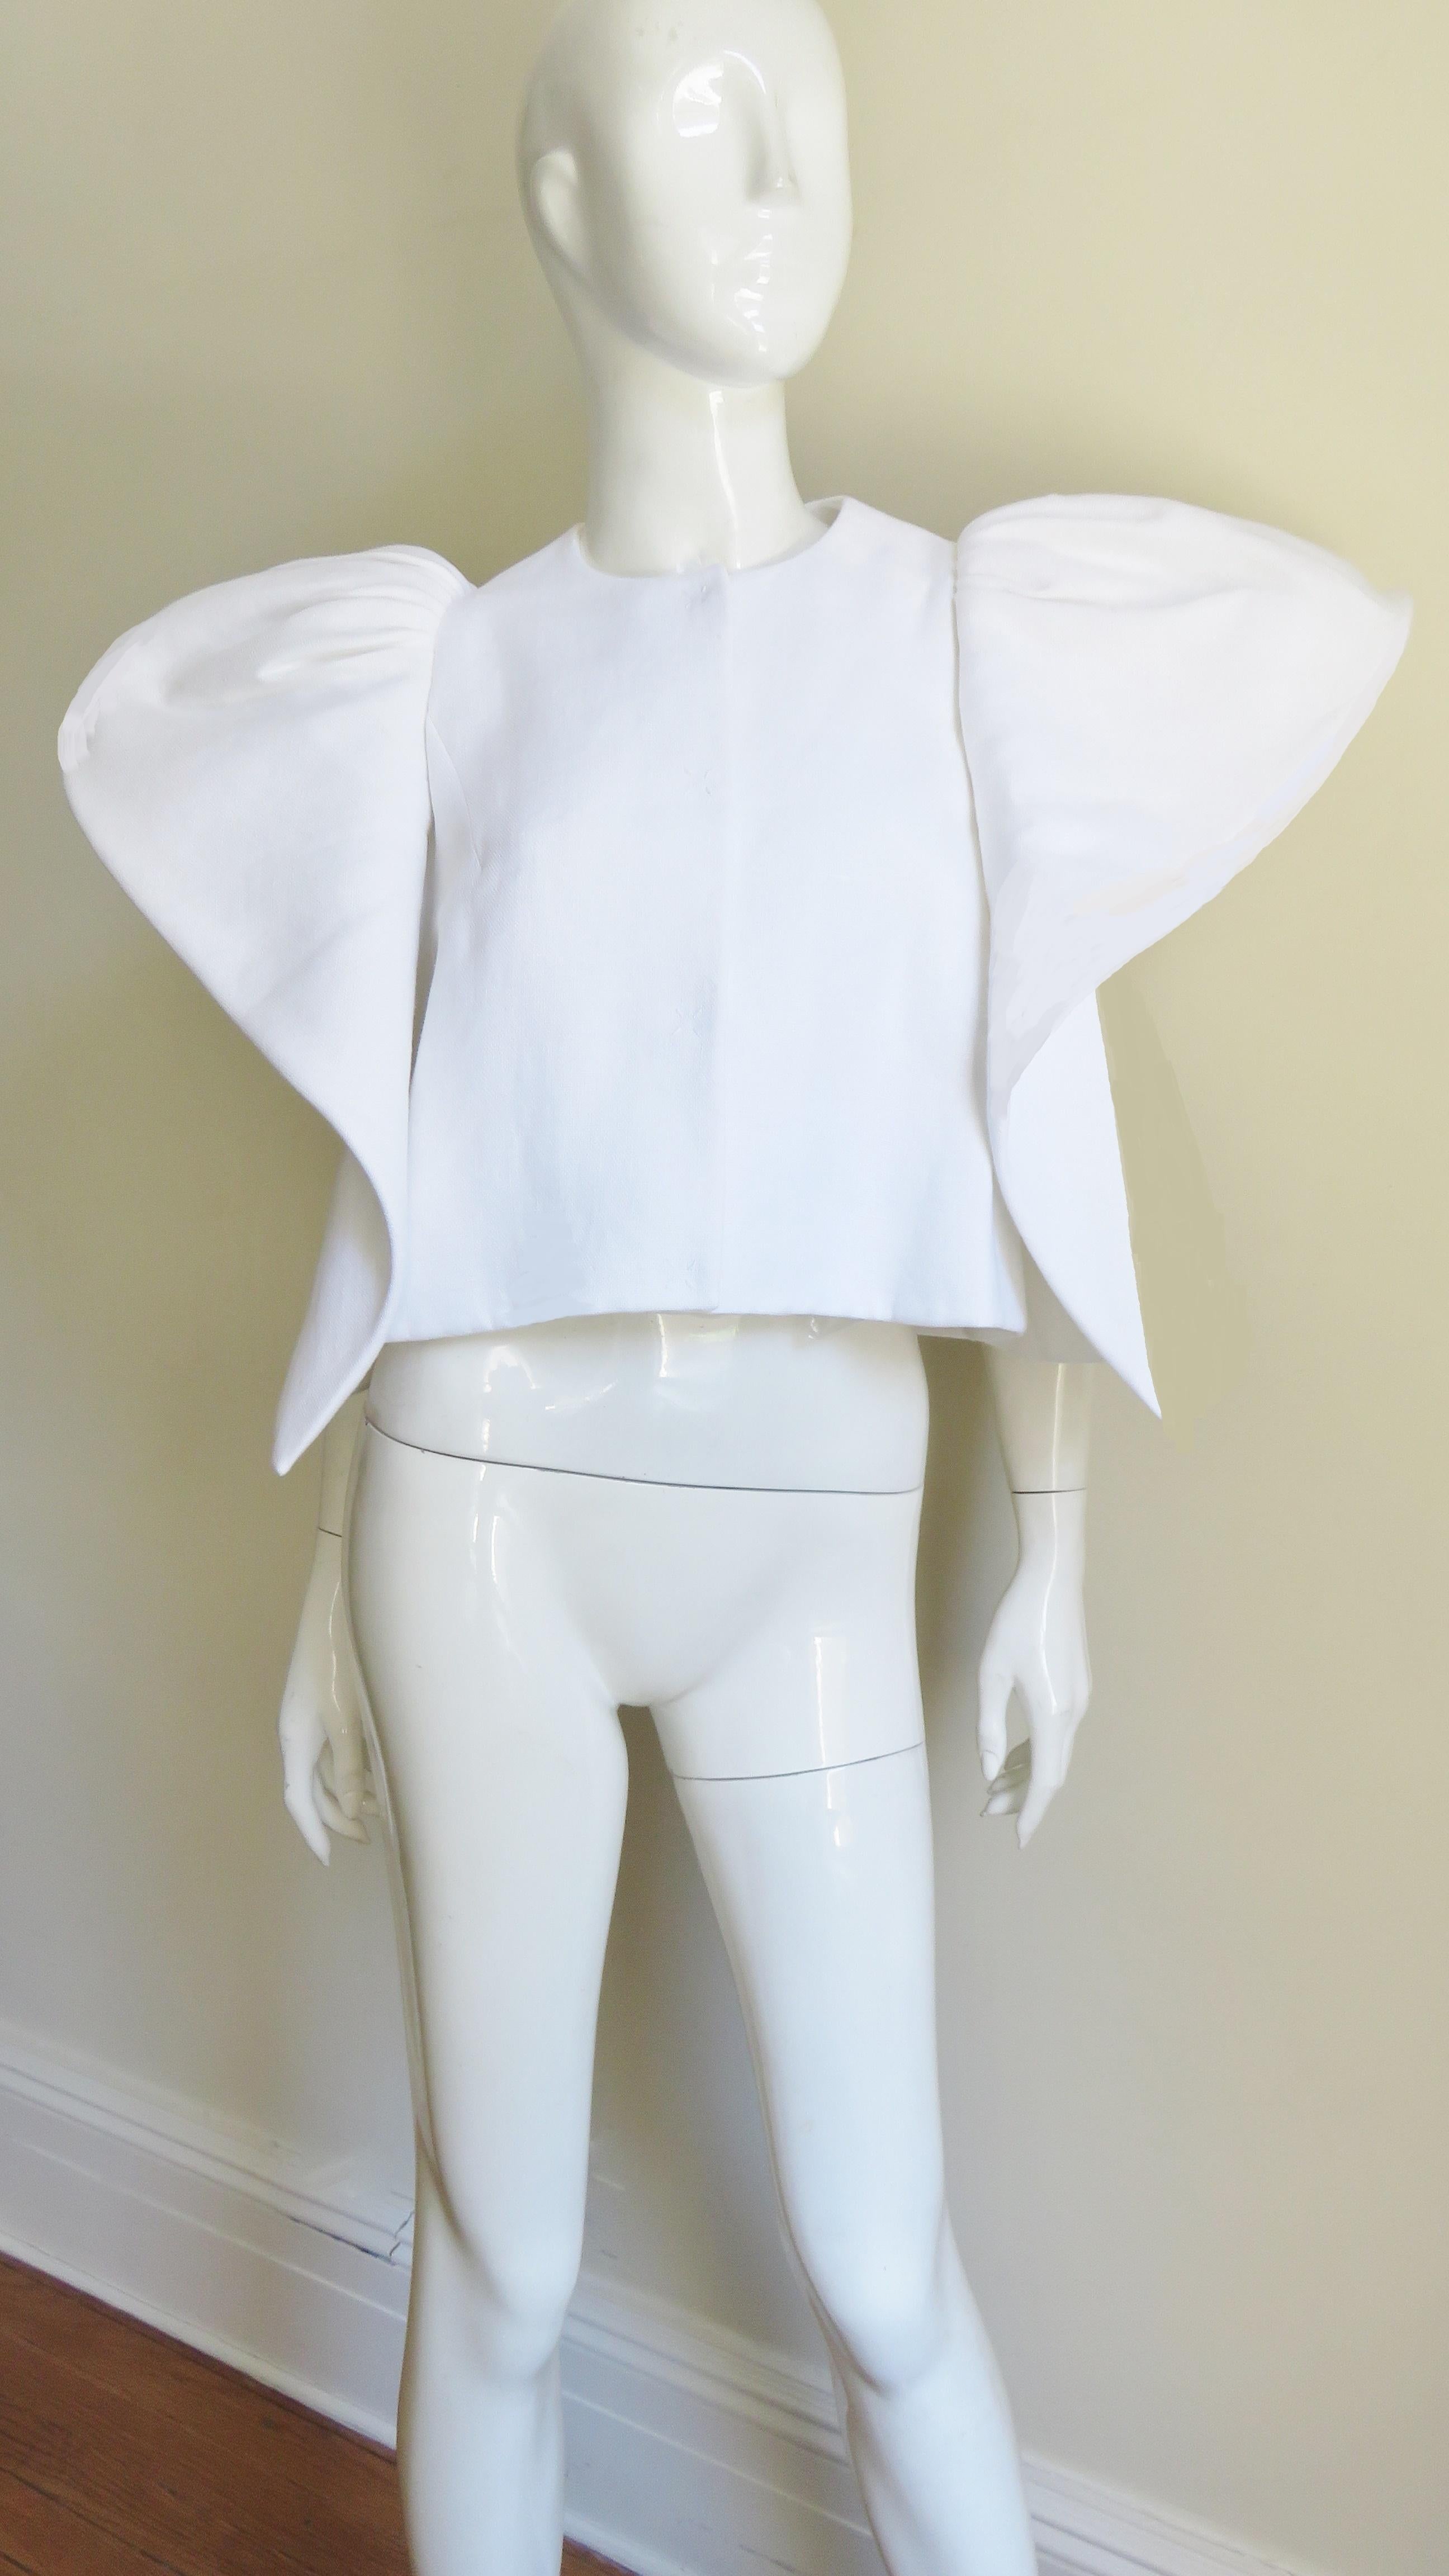 A fabulous sculptural white linen jacket from Deplozo. It has large silver dome front closing and fabulous panels encircling the armholes flaring at the the shoulders and is lined in fine white polished cotton.
Fits sizes Extra Small, Small, Medium.